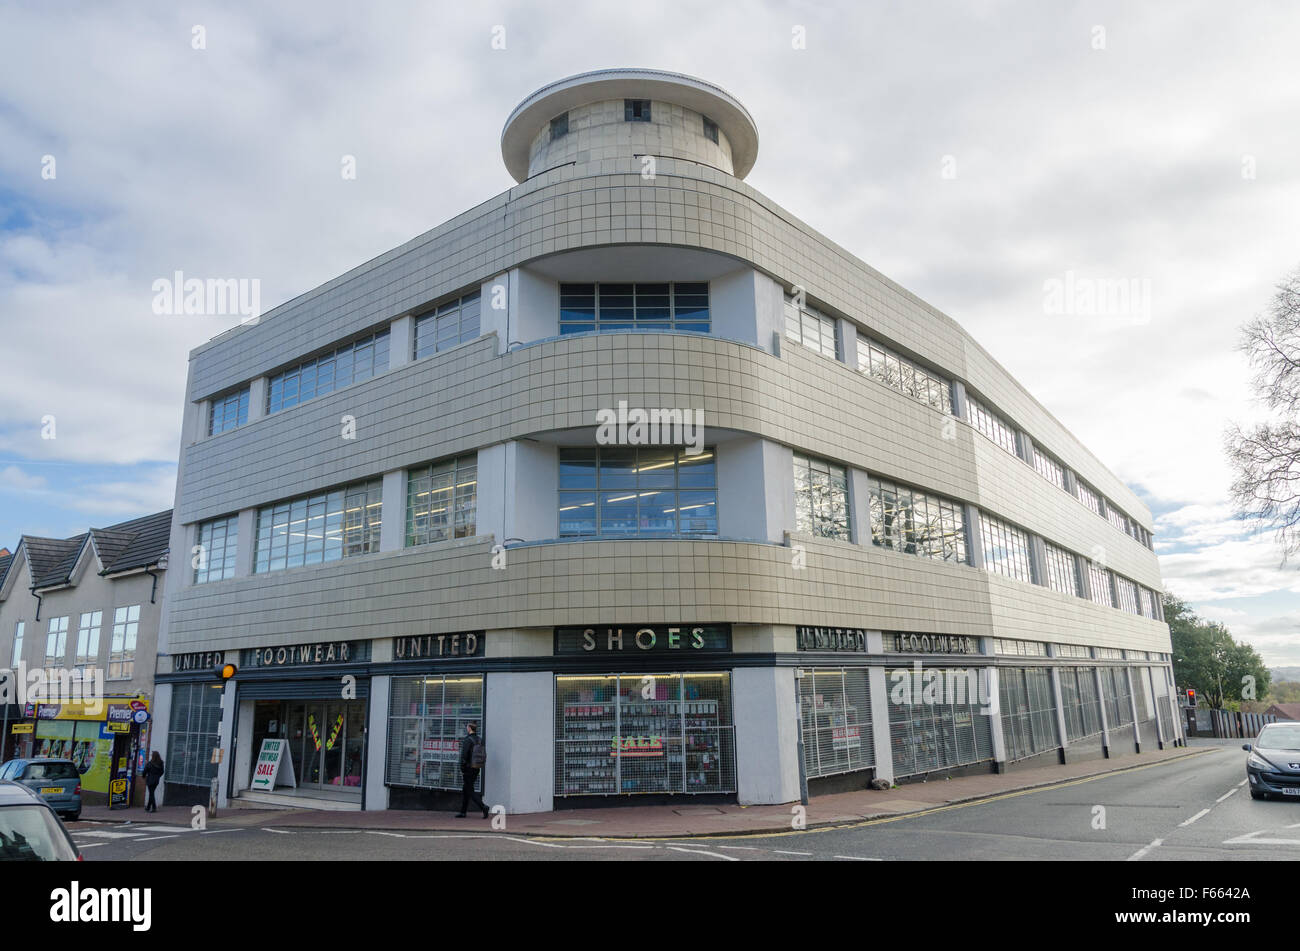 United Footwear art deco-style shop in Dudley High Street, West Midlands Stock Photo